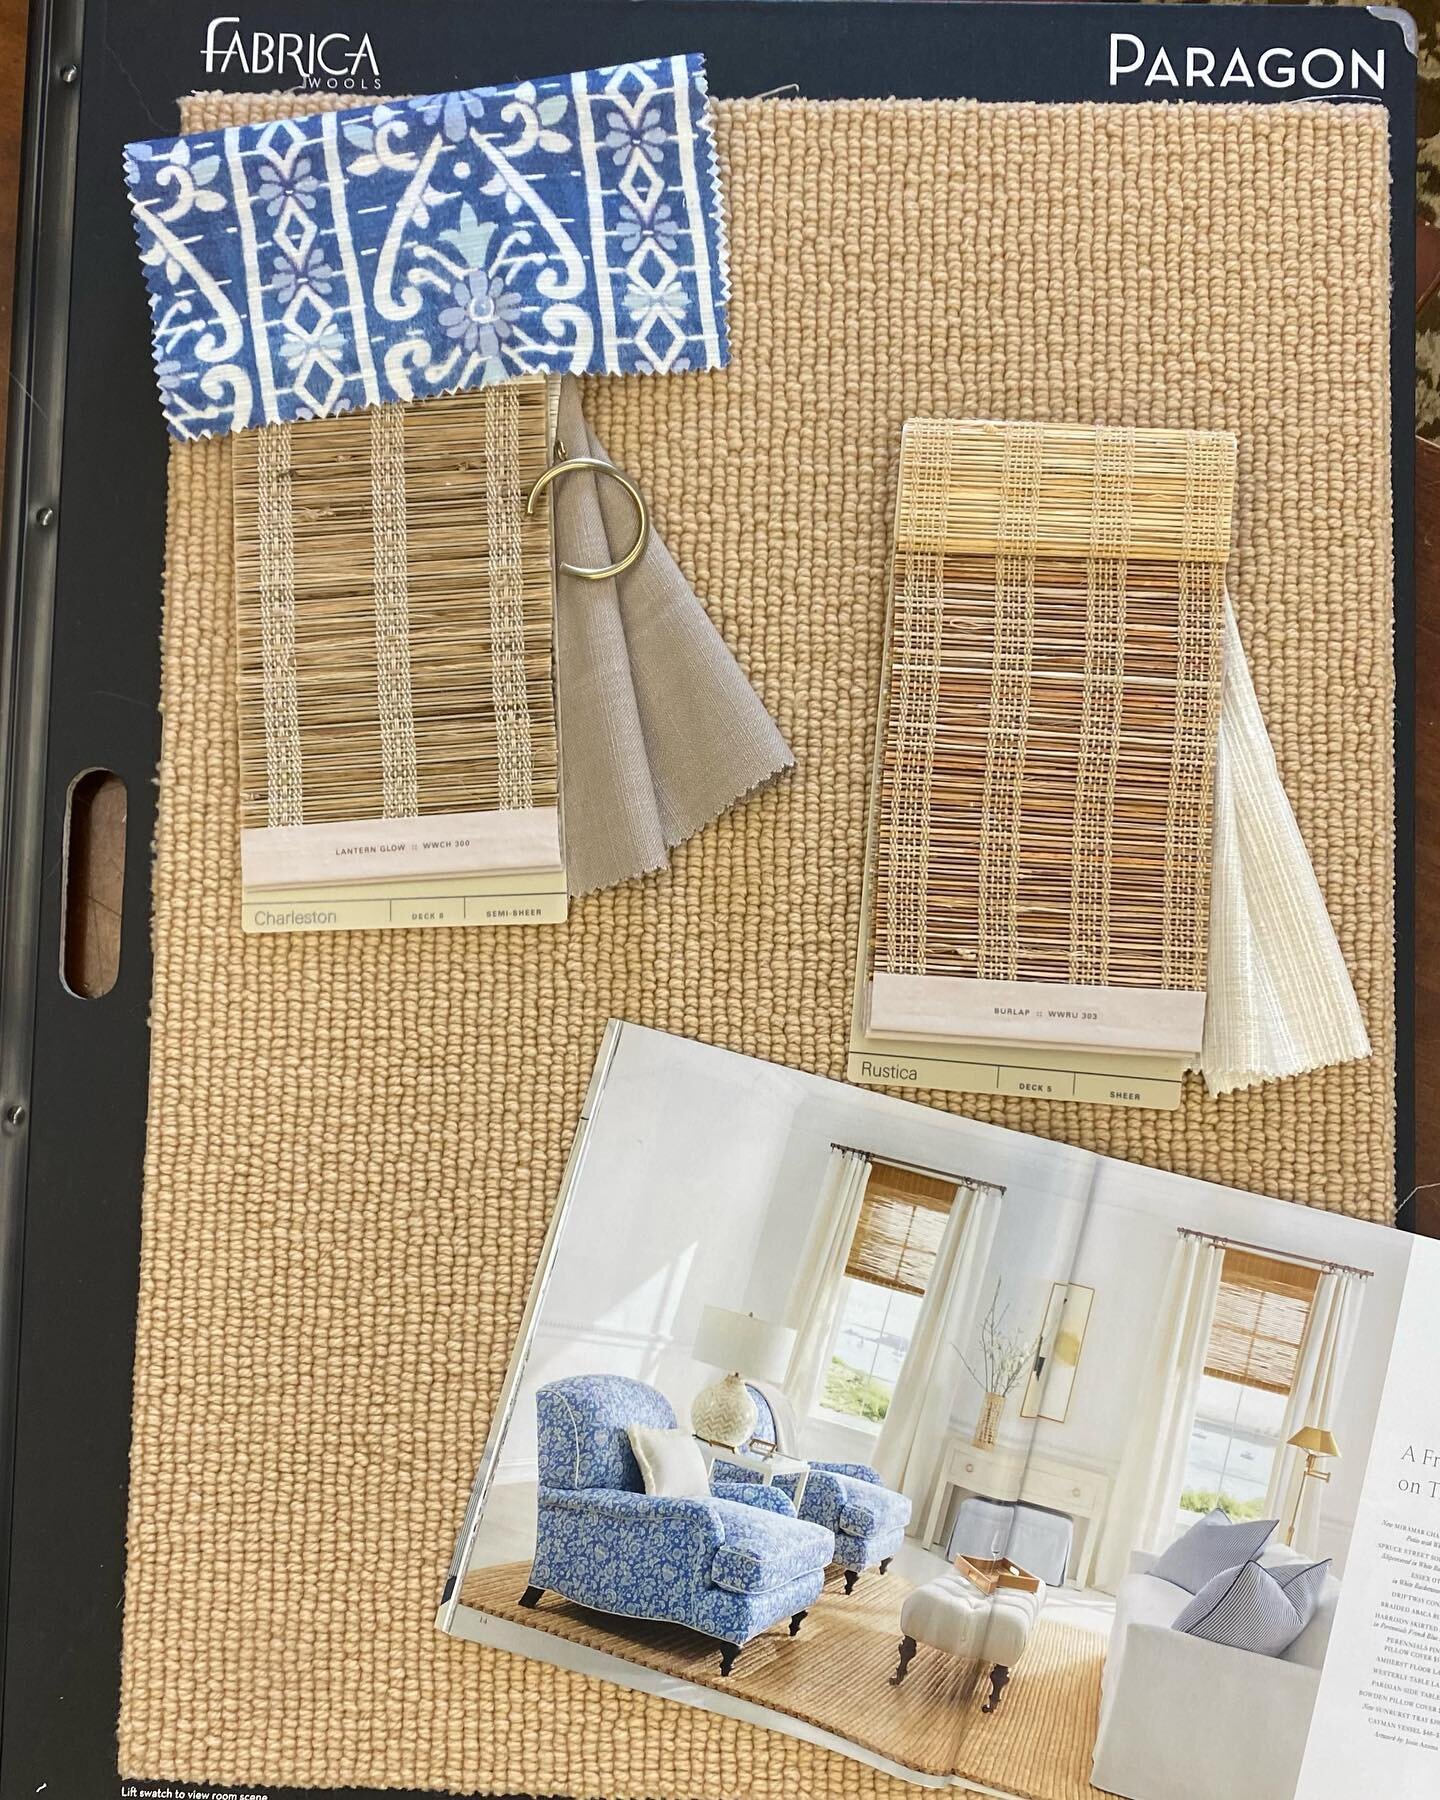 Digging the Serene &amp; Lily vibes we played with today! 

I love seeing natural textural elements like this ribbed wool rug and woven wood shades, complimented and softened perfectly by the right fabrics.

Bring me your room inspiration, I&rsquo;ll